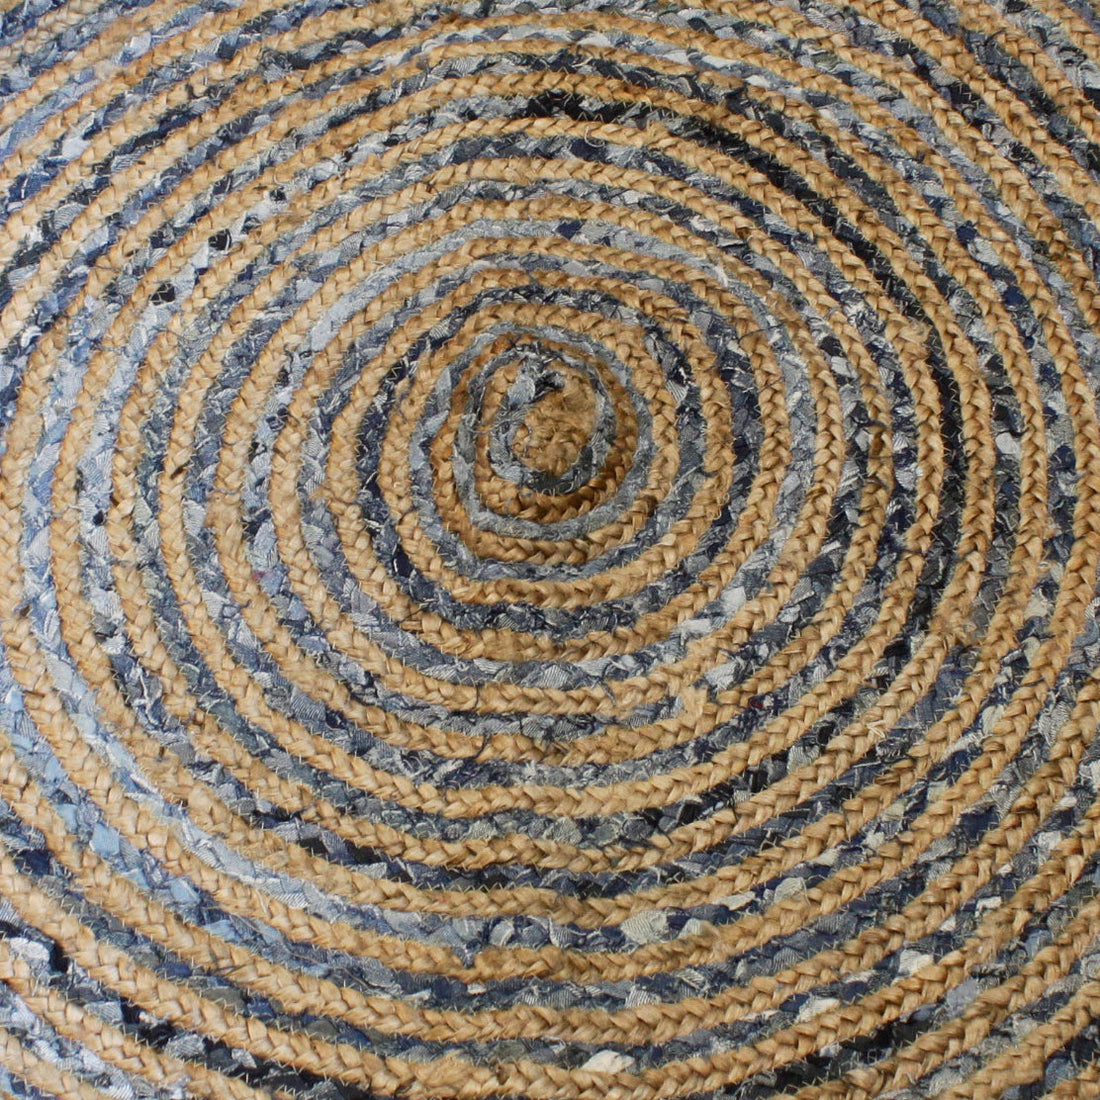 Round Jute and Recycle Denim Rug - 120 cm - £75.0 - Rugs 